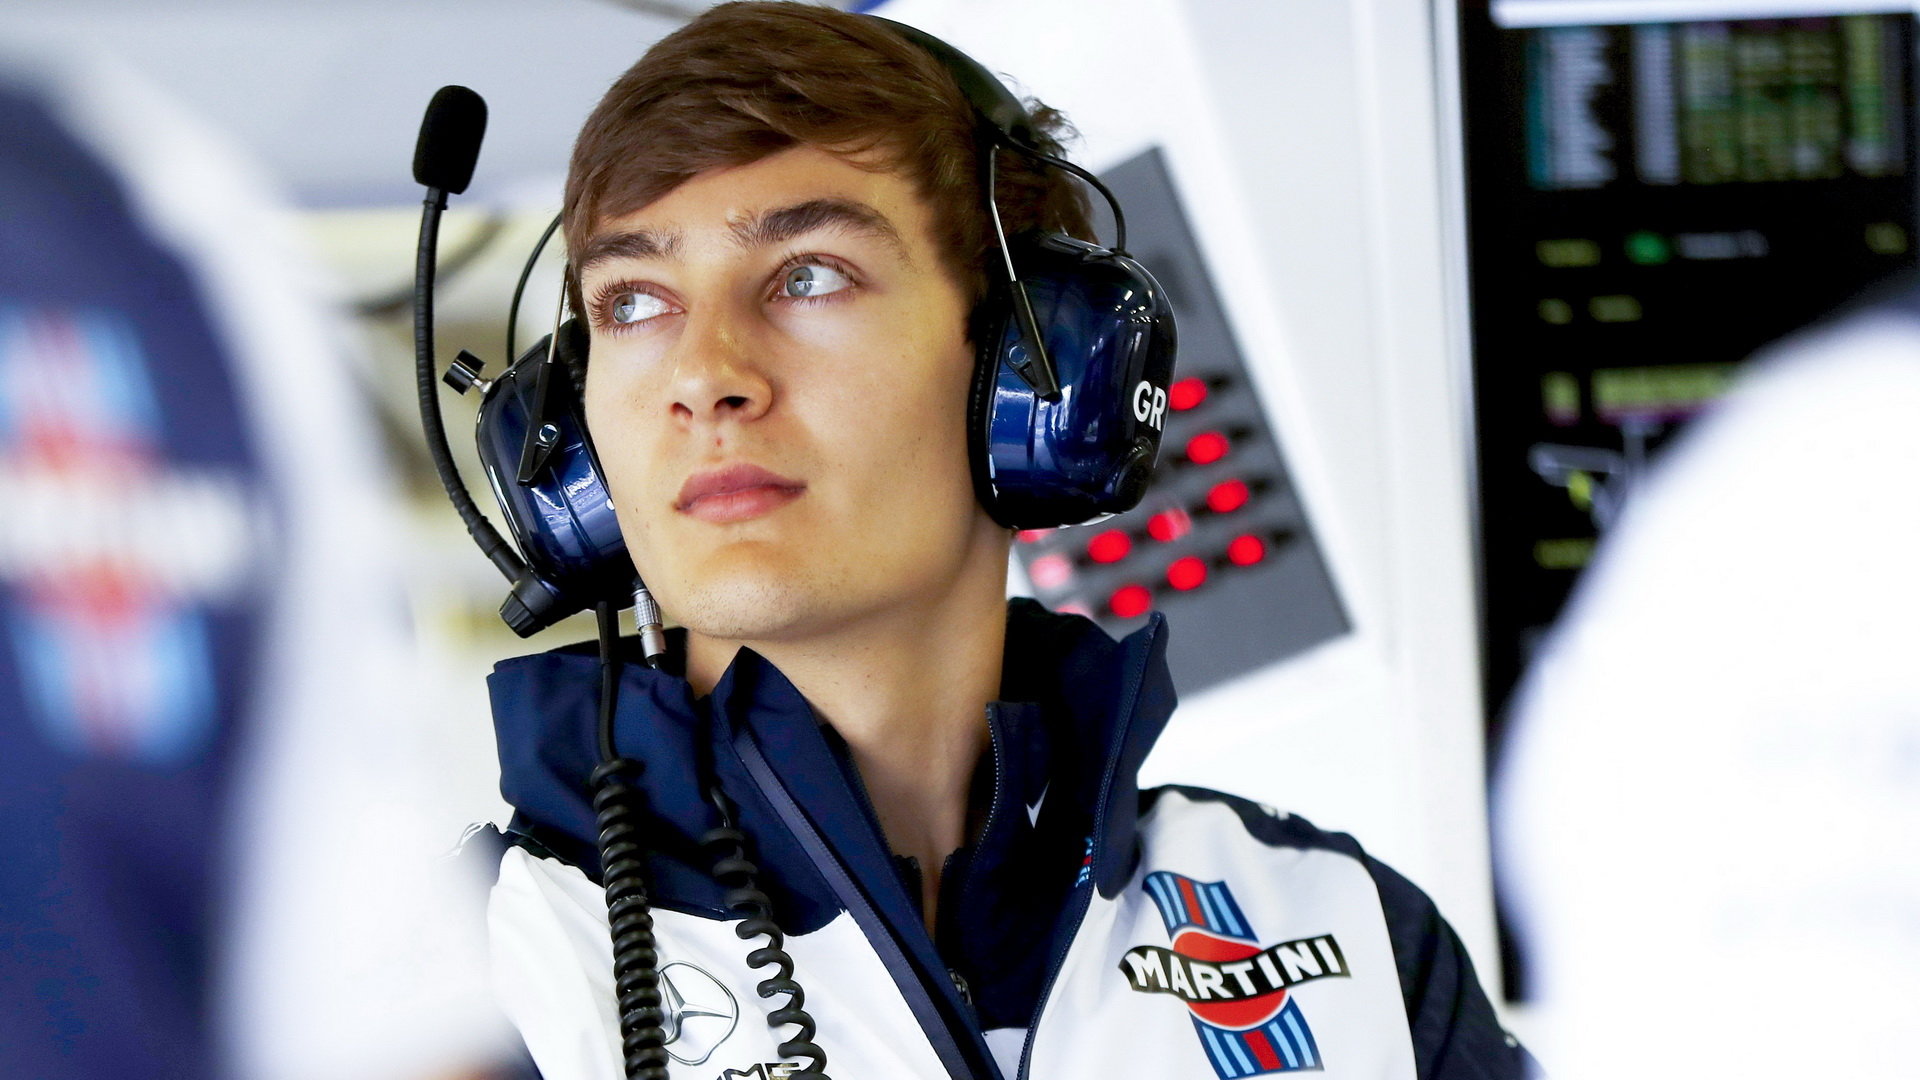 George Russell bude letos závodit s Robertem Kubicou za Williams